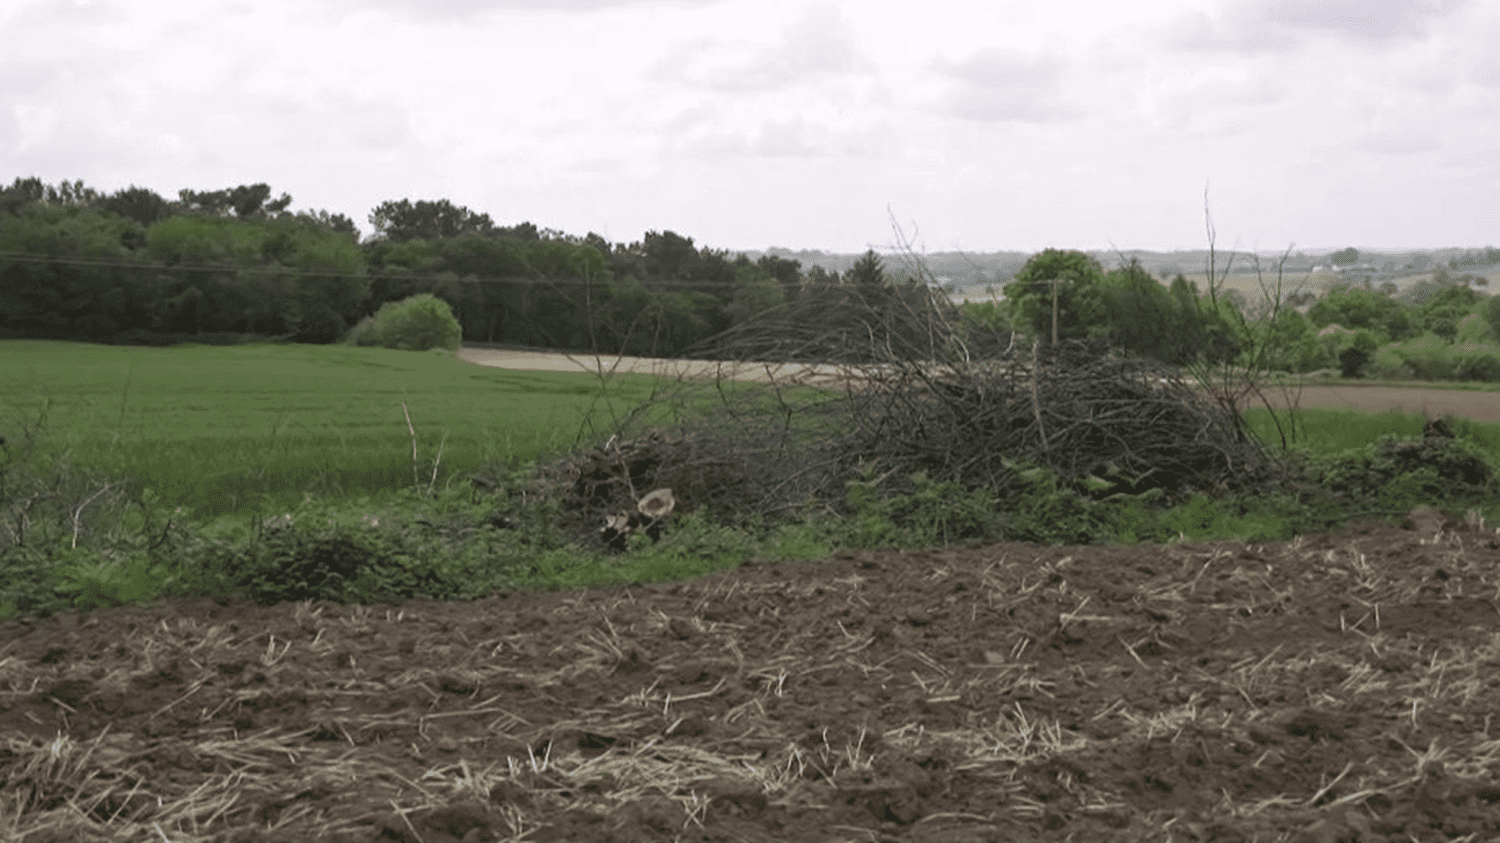 Biodiversity: farmers in a hurry to preserve hedgerows
